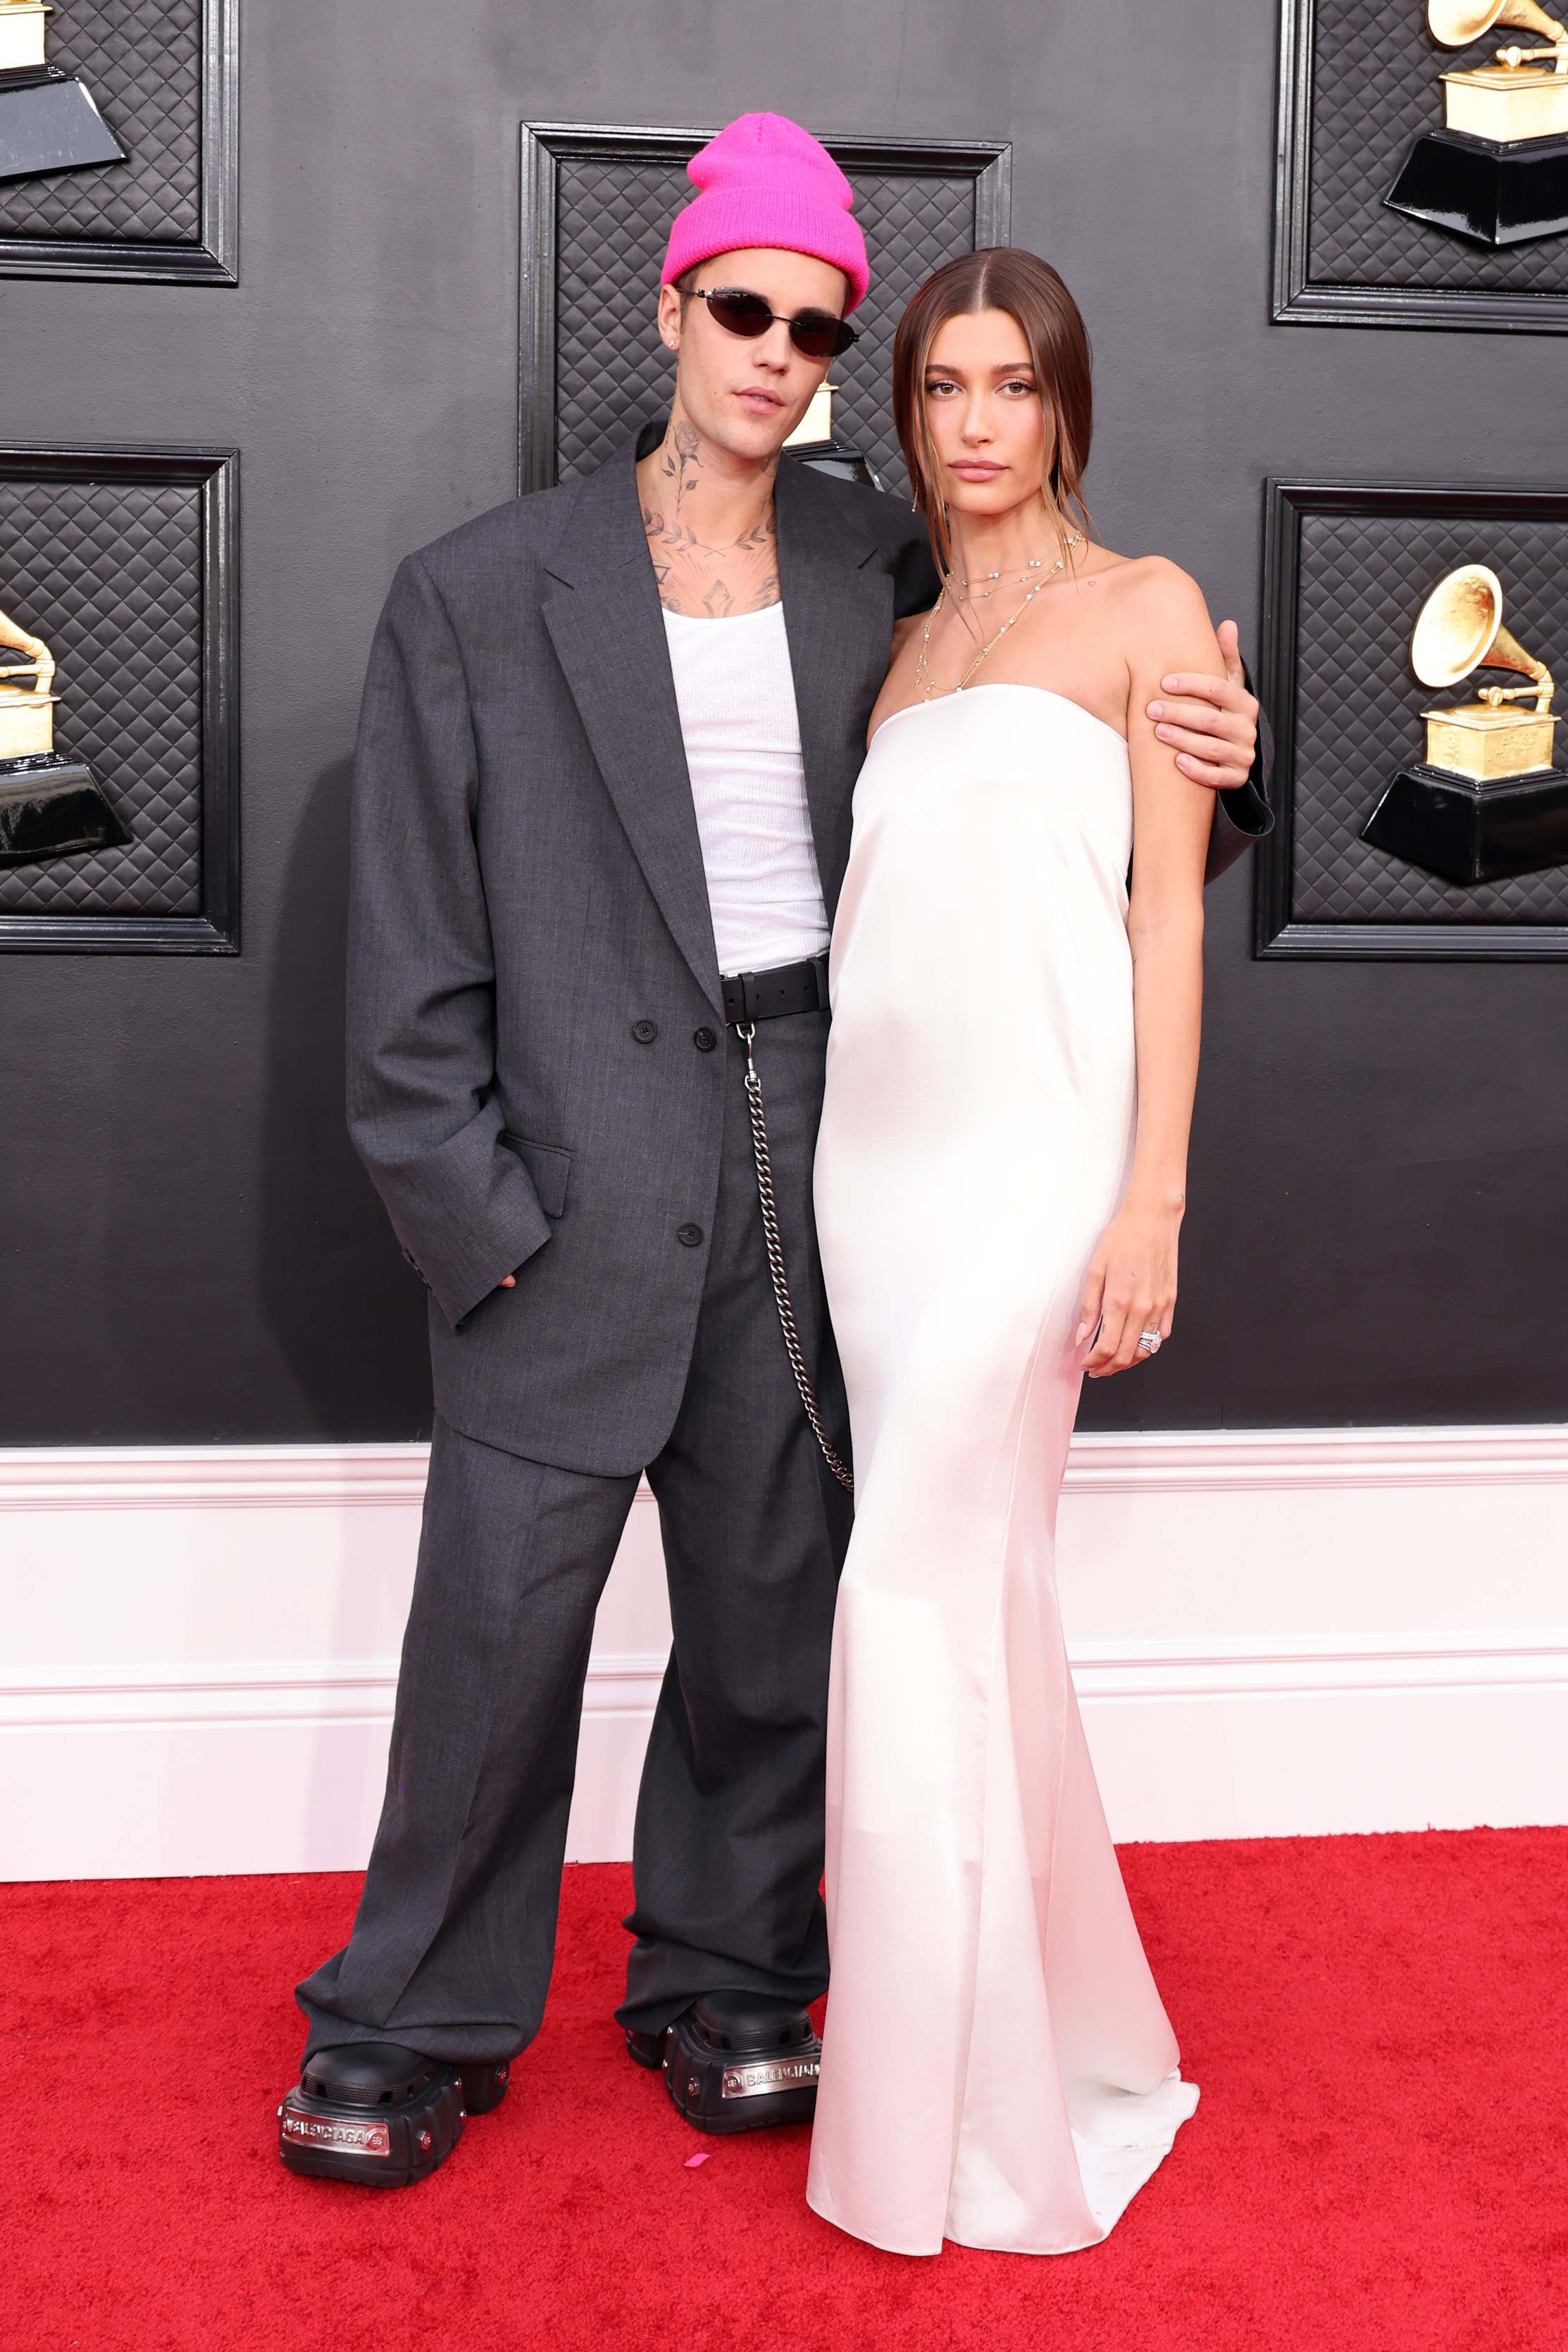 LAS VEGAS, NEVADA - APRIL 03: (L-R) Justin Bieber and Hailey Bieber attend the 64th Annual GRAMMY Awards at MGM Grand Garden Arena on April 03, 2022 in Las Vegas, Nevada. (Photo by Amy Sussman/Getty Images) (Foto: Getty Images)